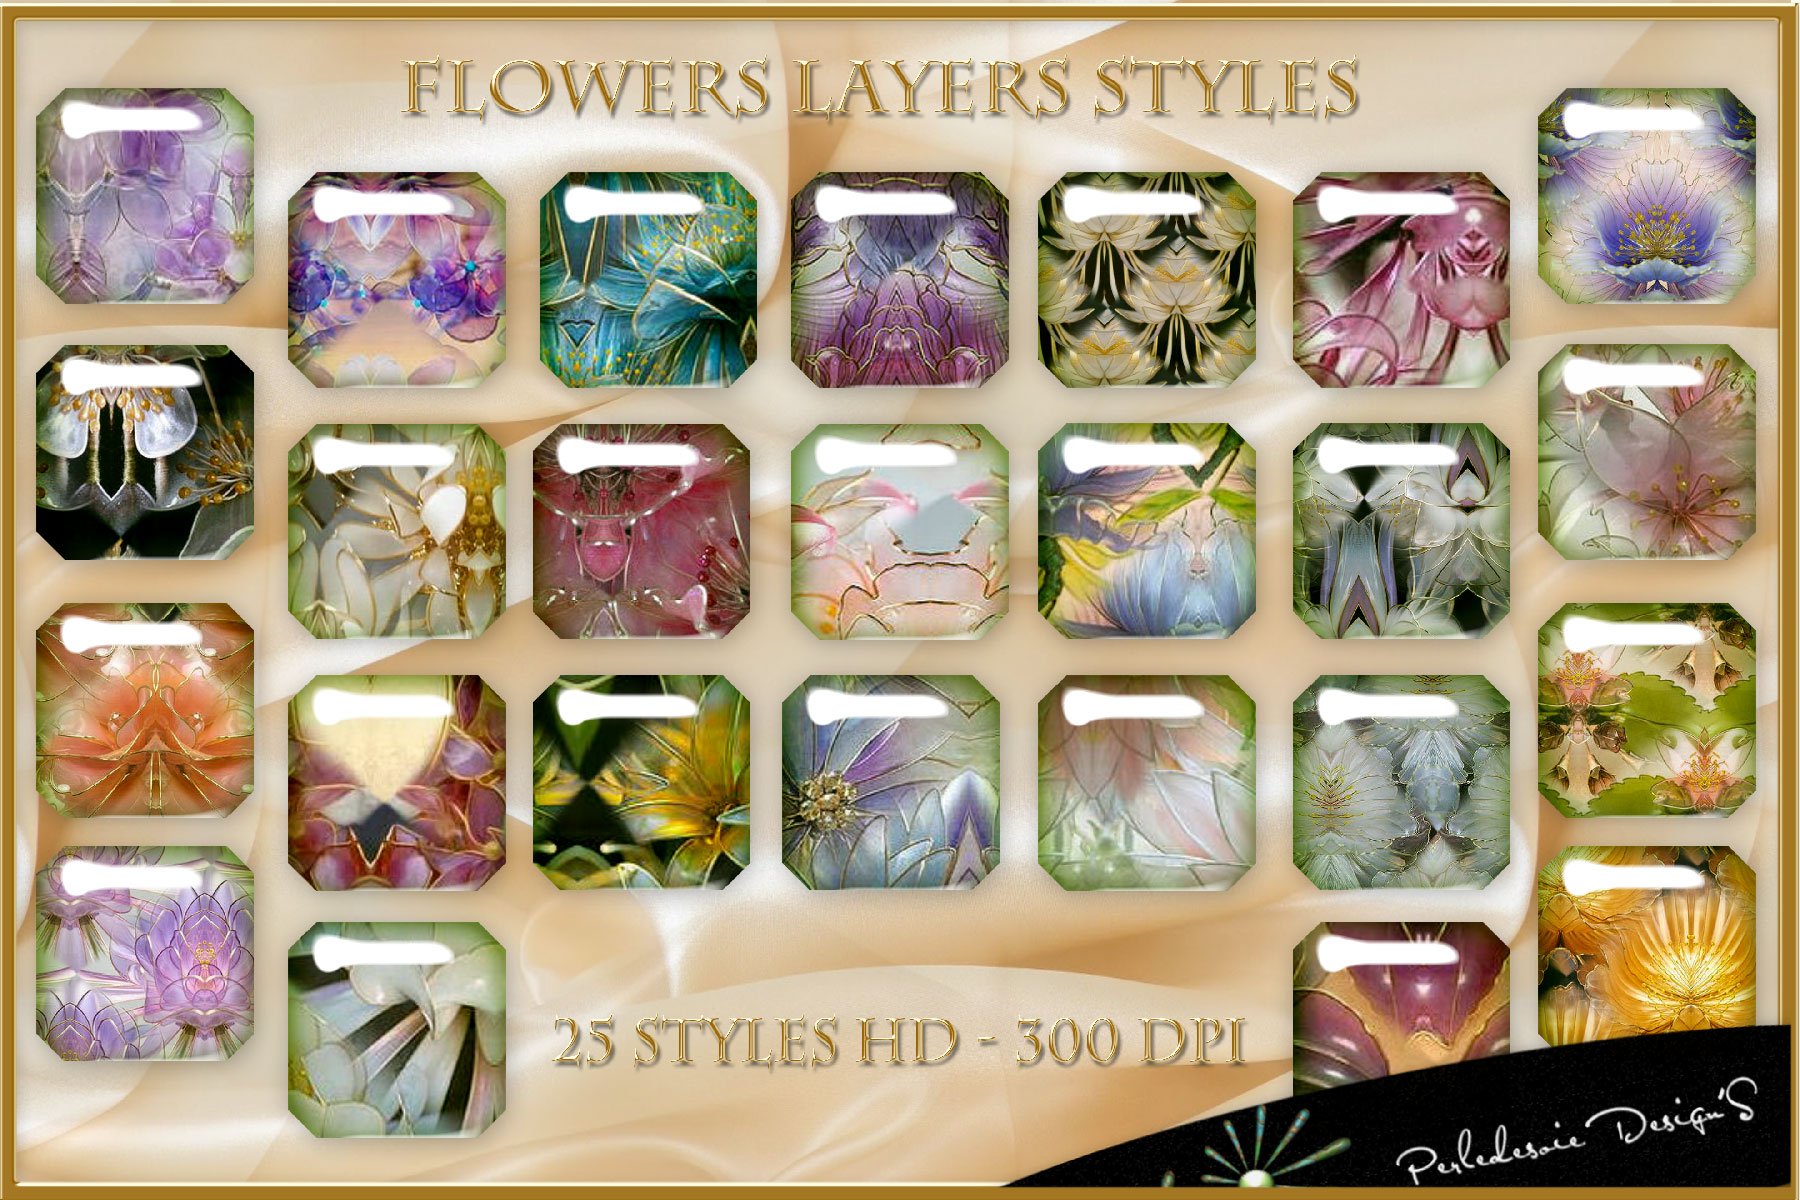 flowers stylescover image.